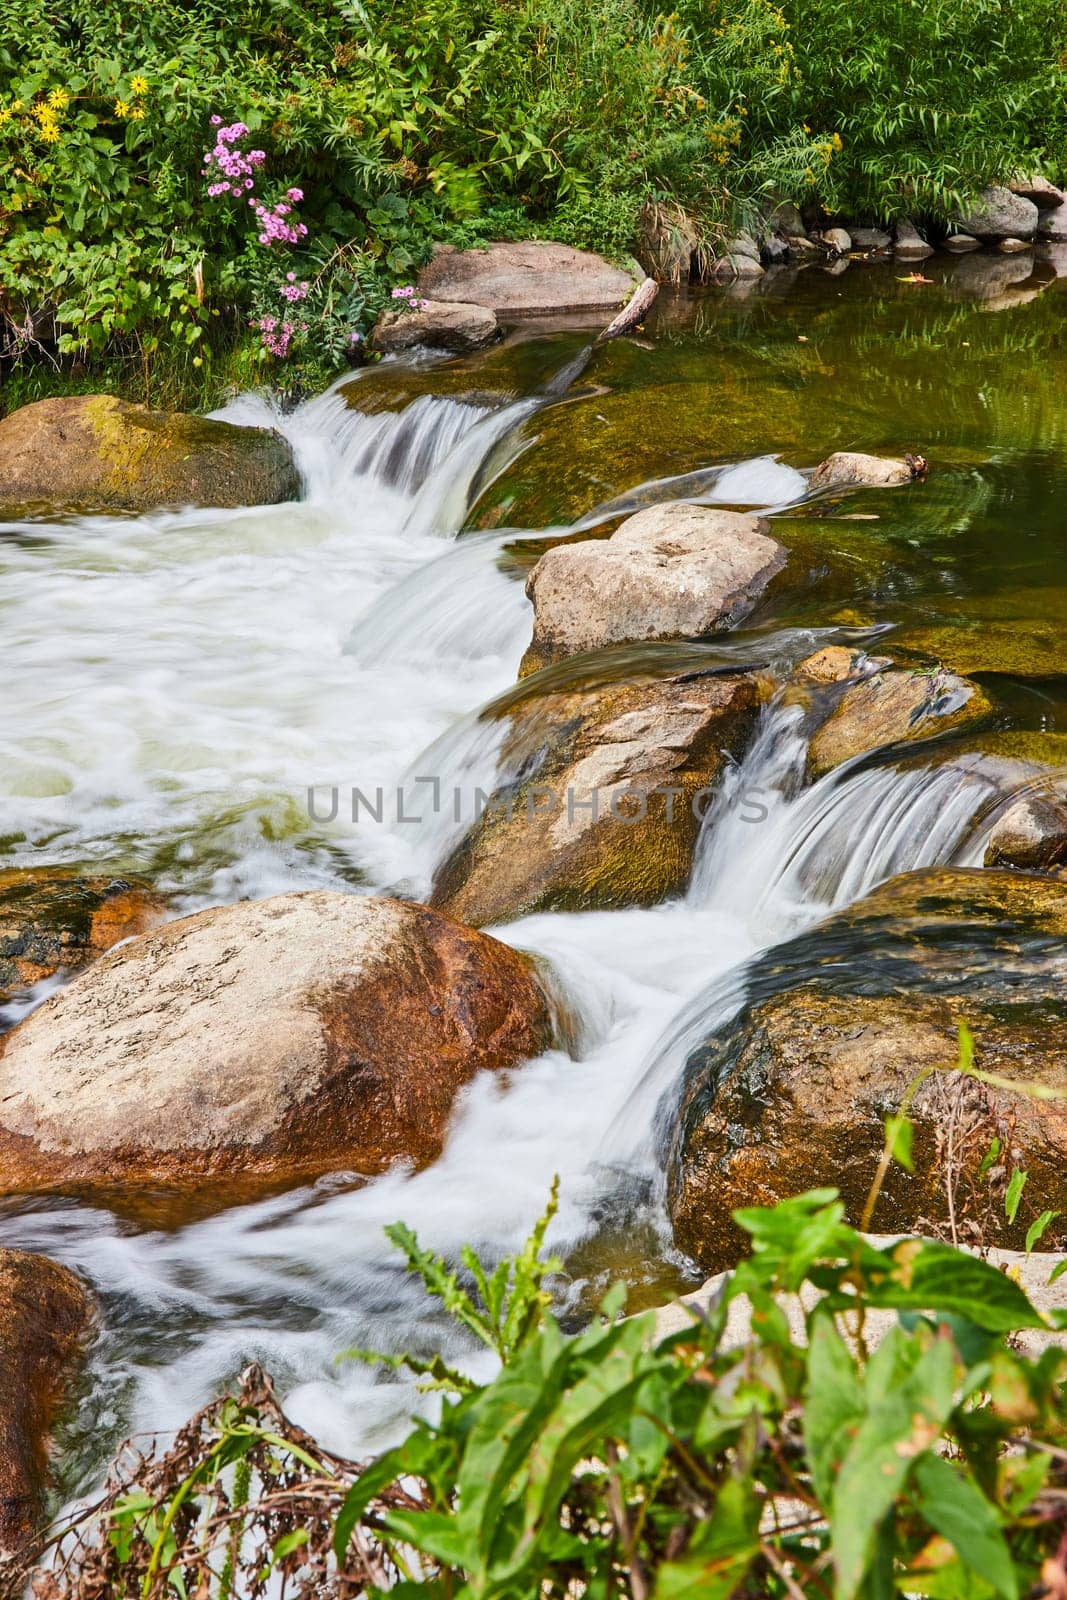 Serene Waterfall Oasis with Pink Wildflowers, Lush Greenery Close-Up by njproductions